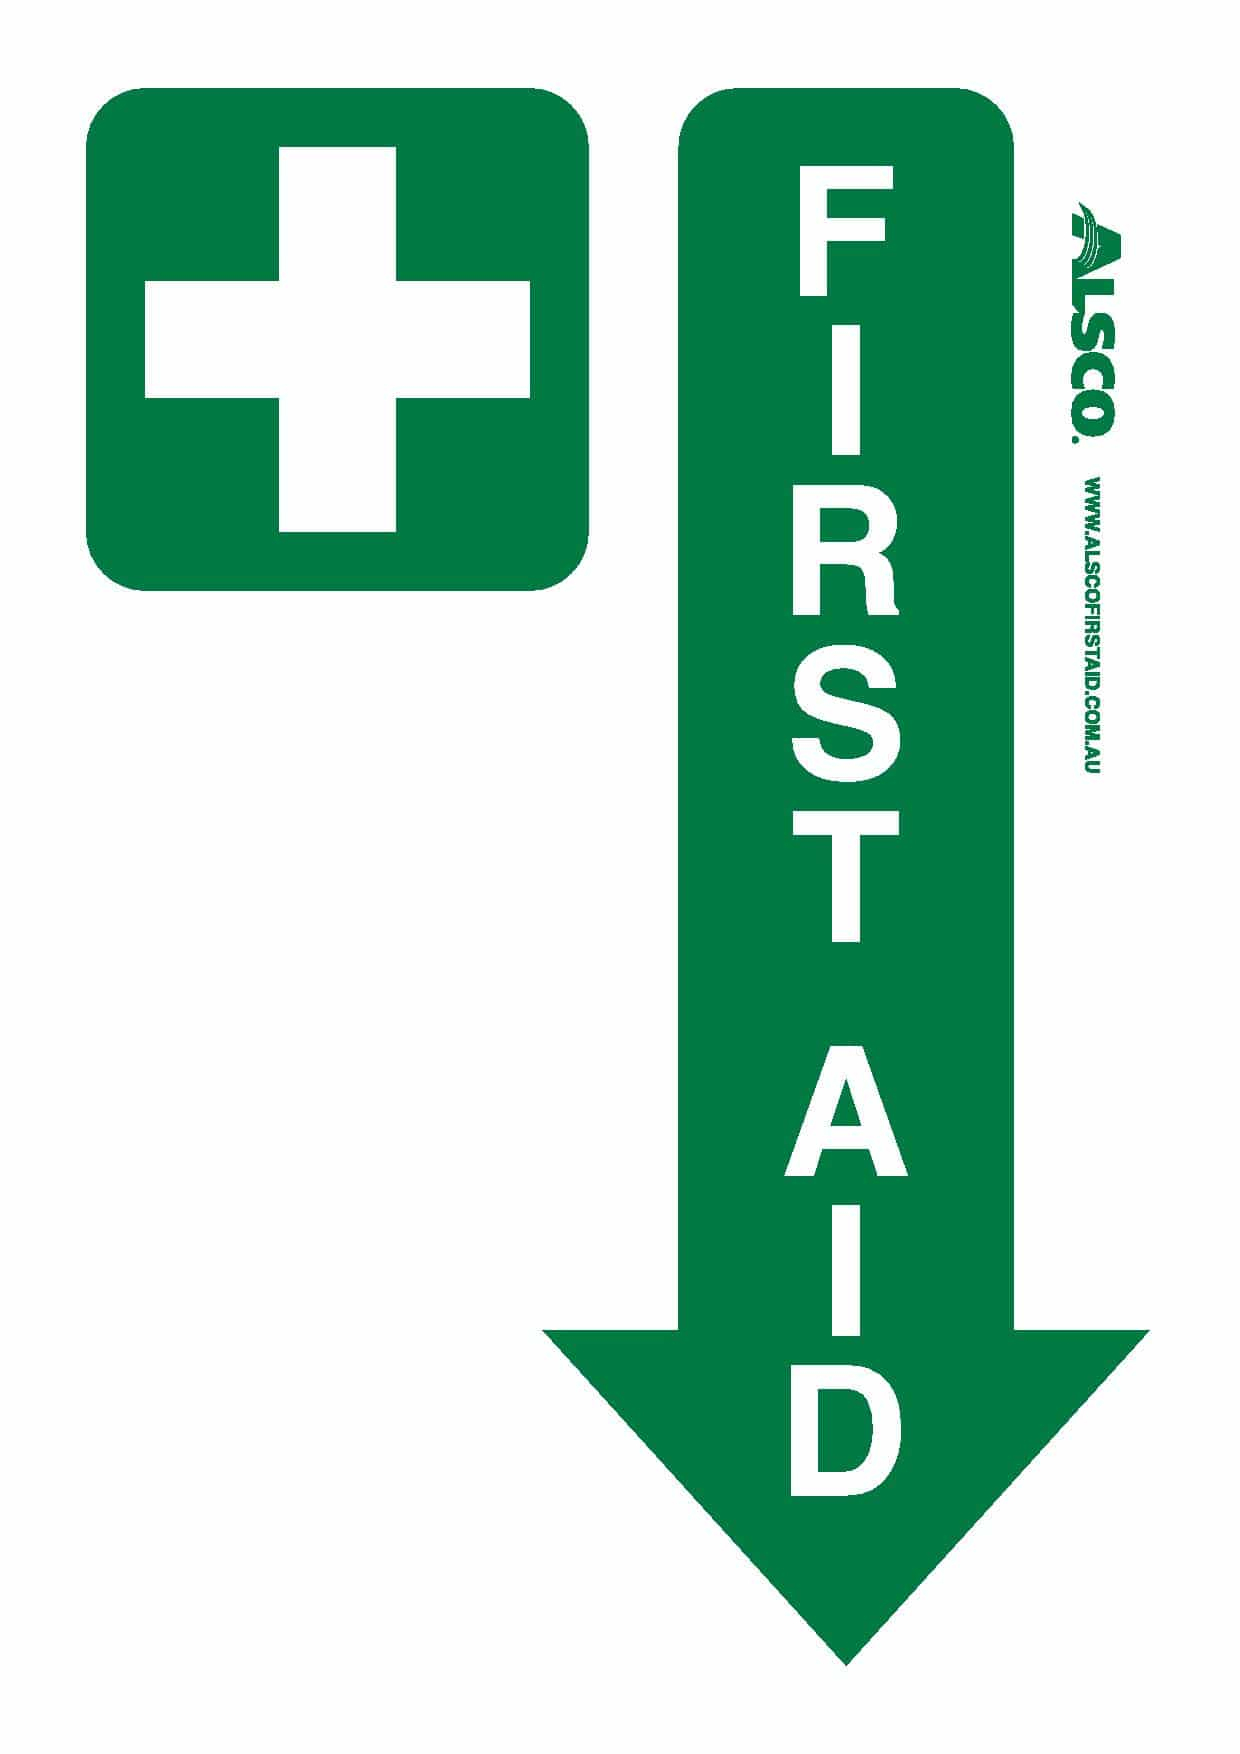 Multiple First Aid Signs | Free Poster Download | Alsco First Aid - Free Printable First Aid Kit Signs